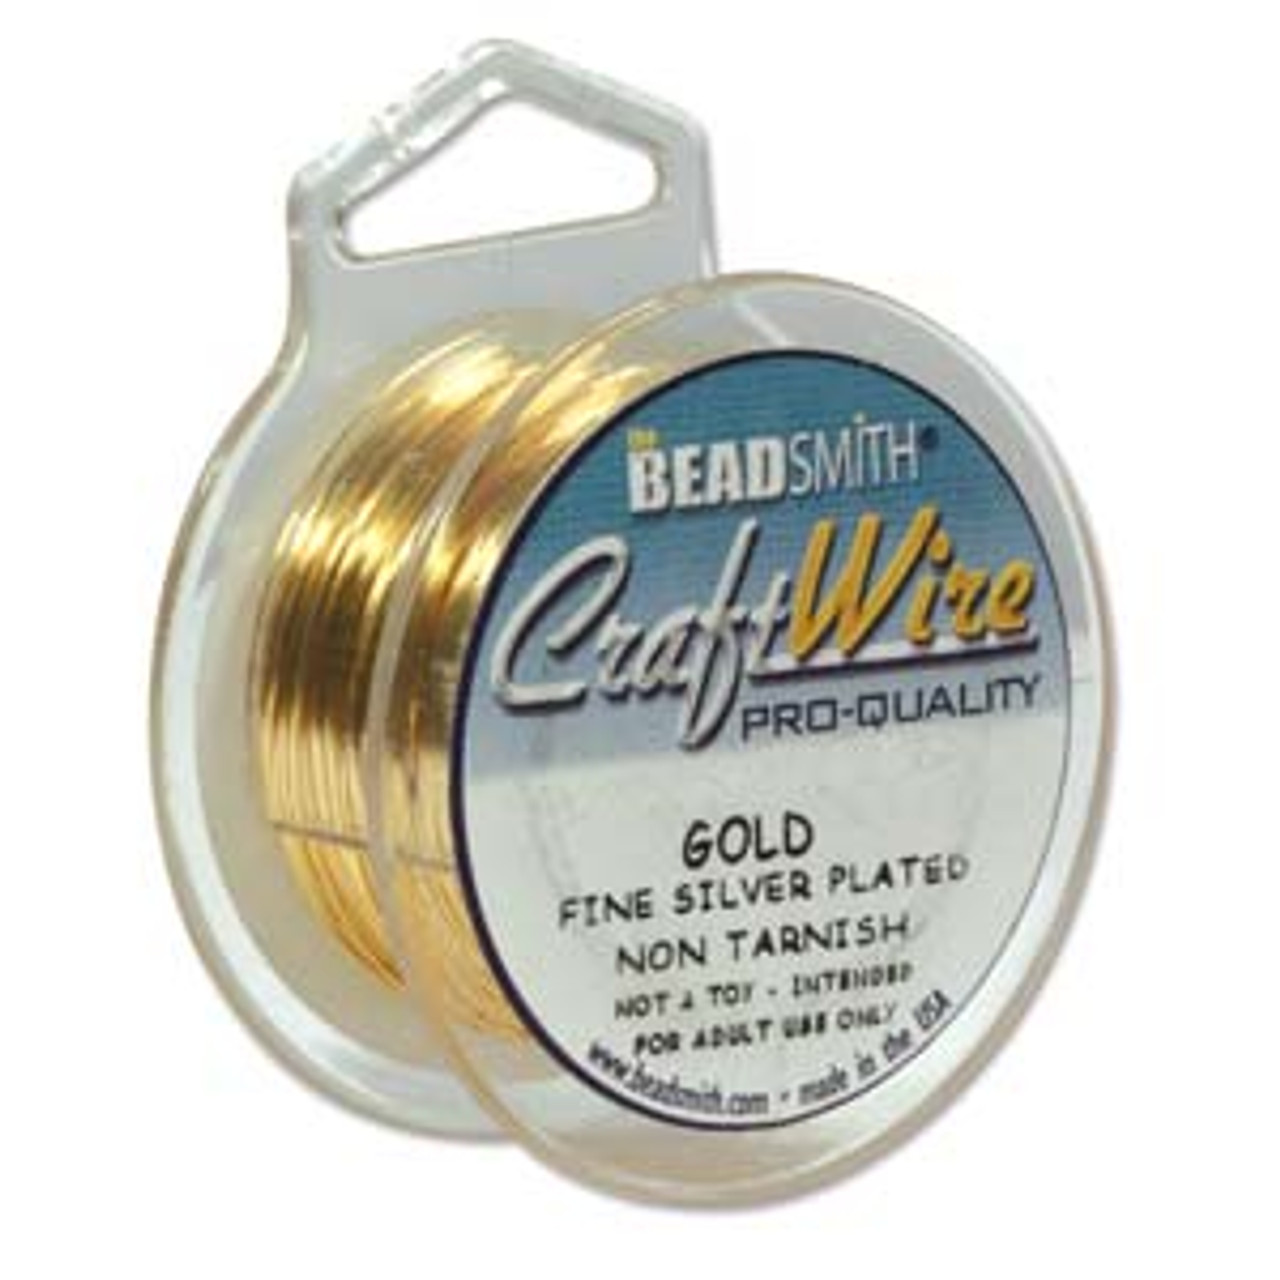 The Beadsmith Wire Elements Craft Wire Tarnish Resistant, Soft Temper, Round, Gold Color 22 Gauge, 20 Yards Spool, 12 Spools/Box Jewelry Making, Wire